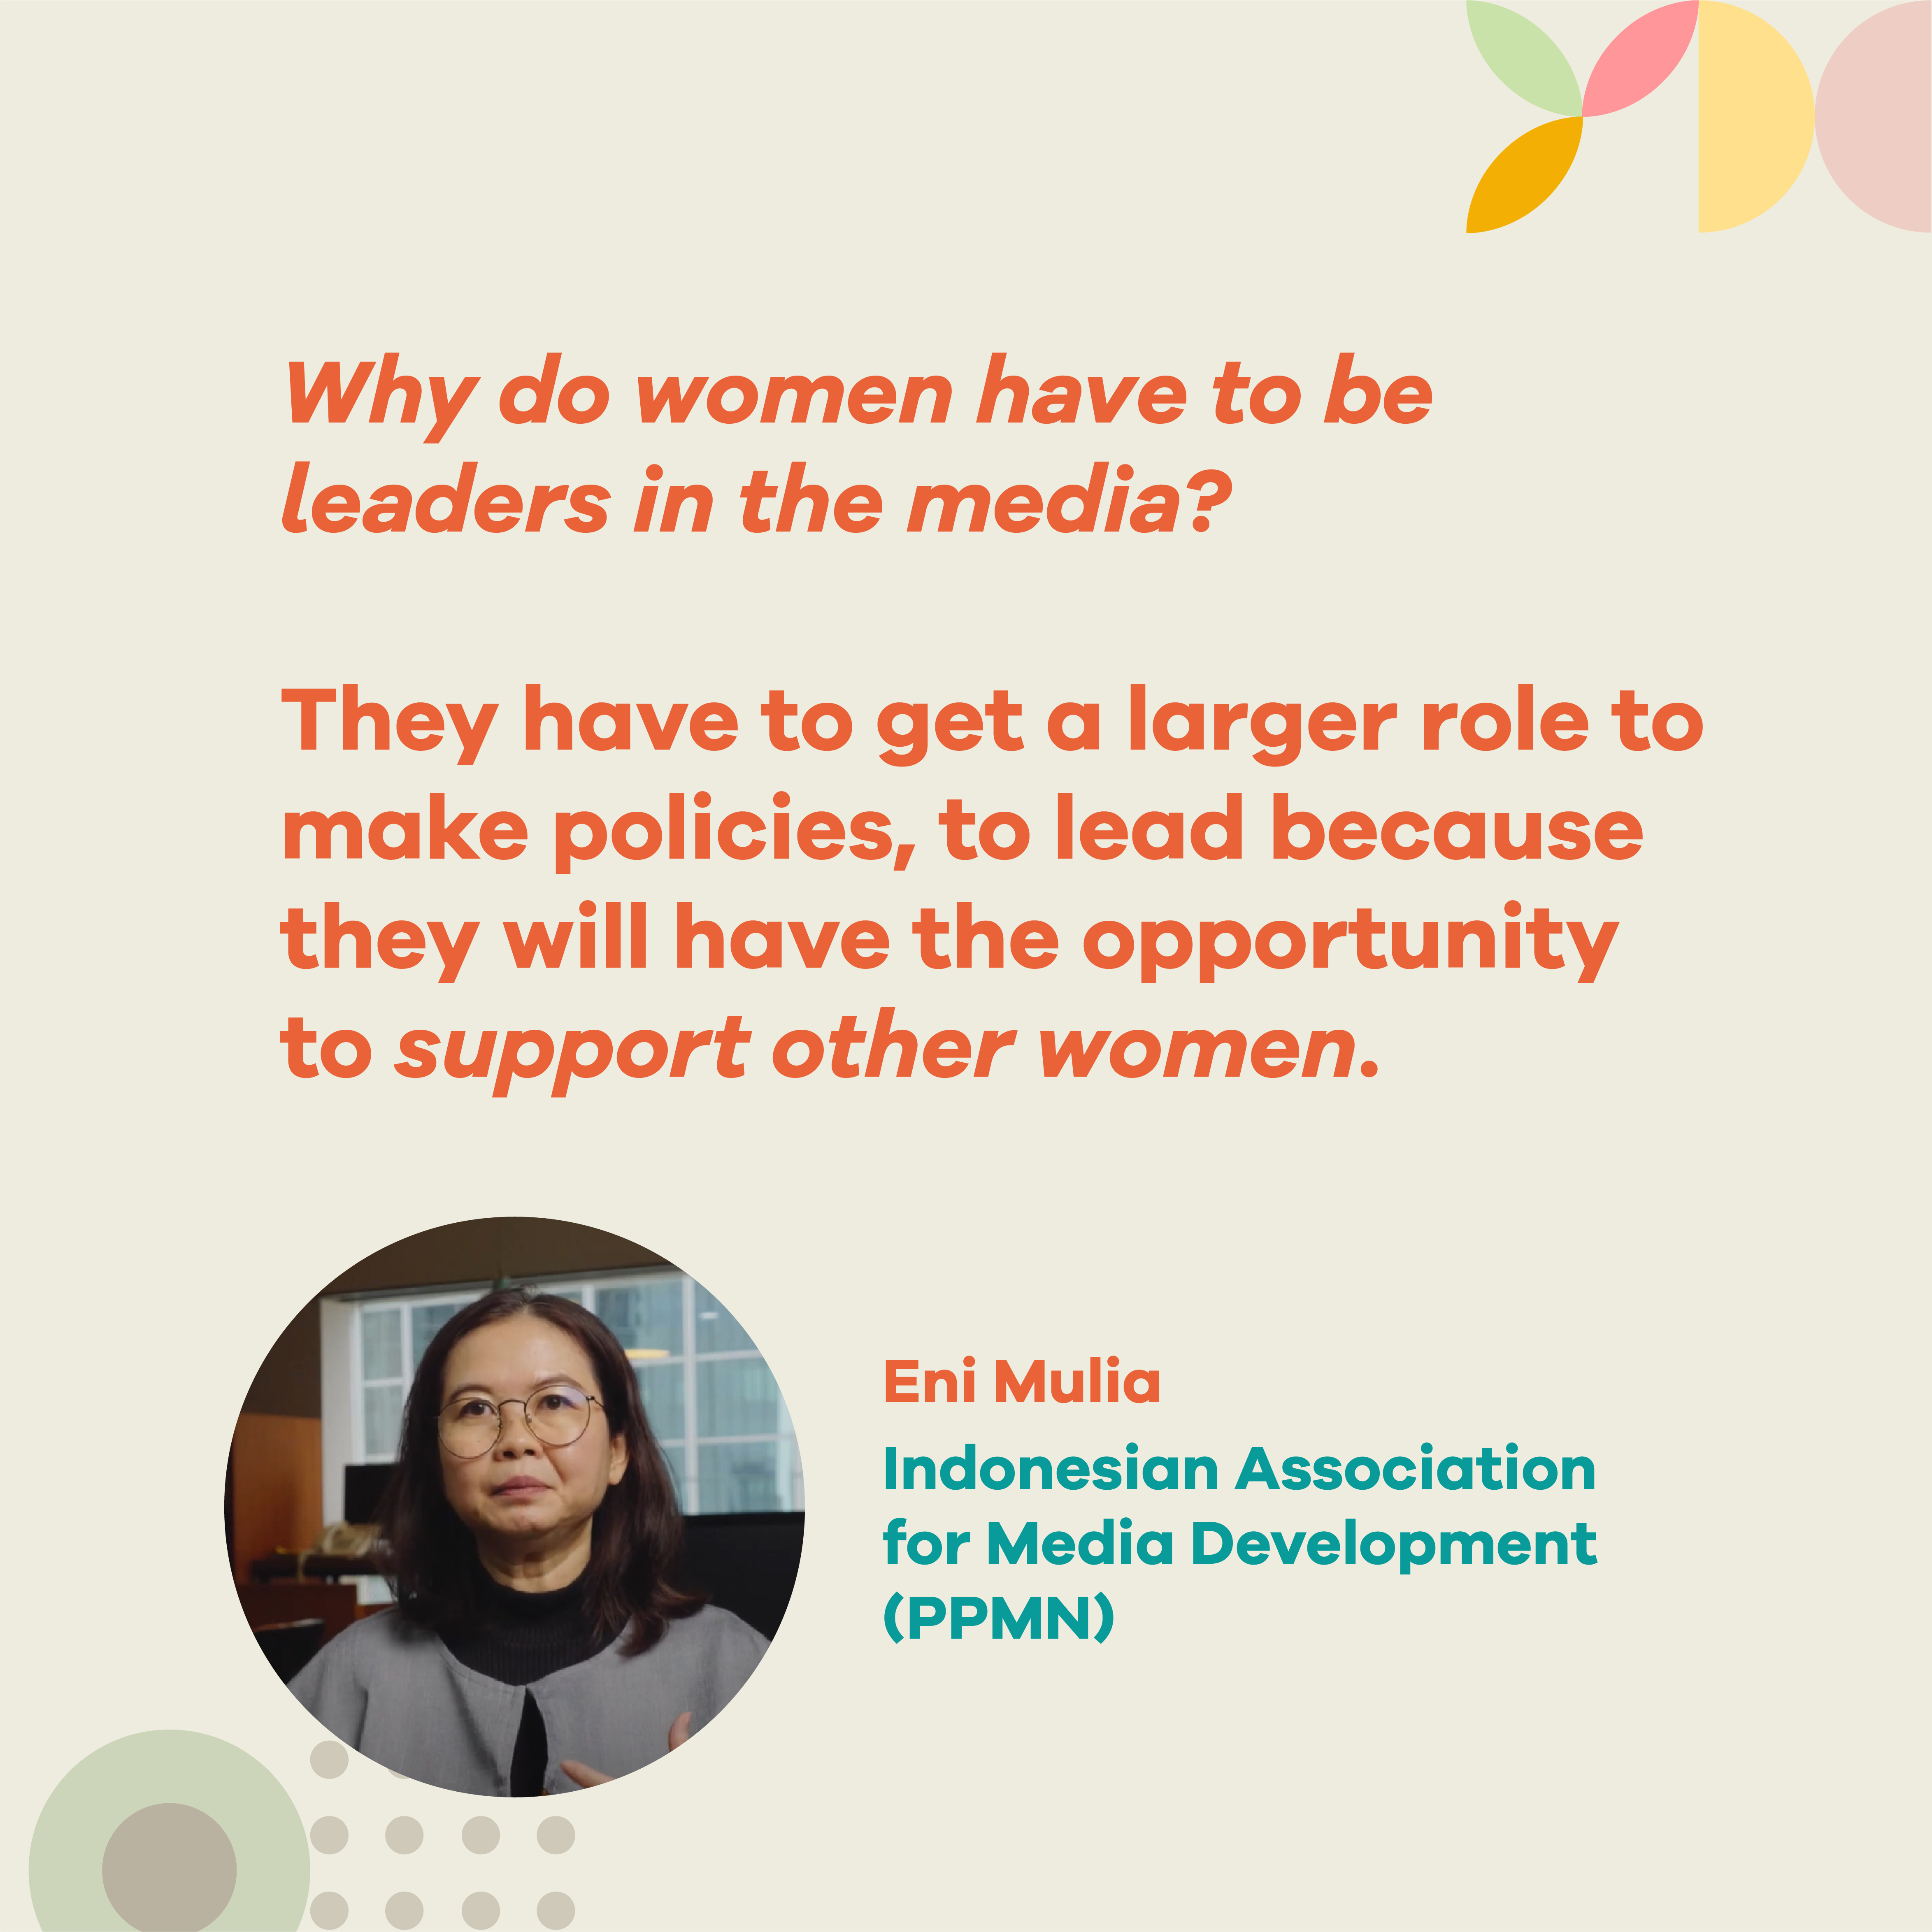 Photo of Eni Mulia with quote excerpt from article